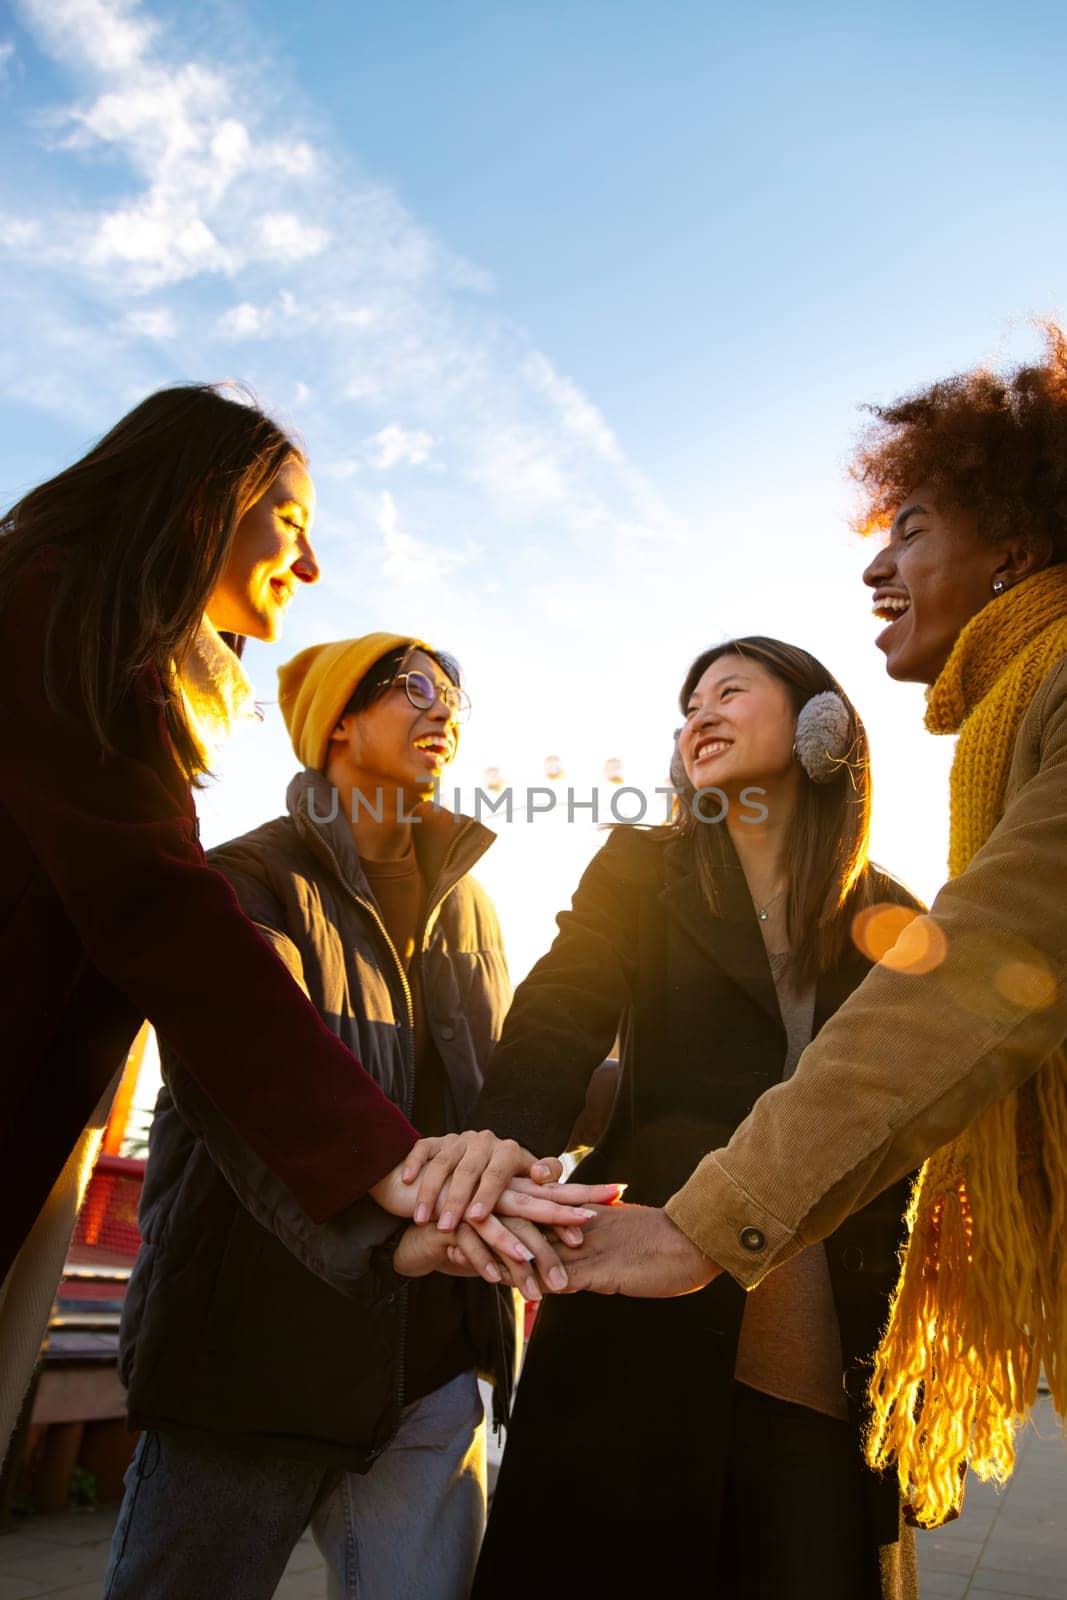 Group of multiracial college student friends stacking hands together in a circle as symbol of community and friendship outdoors on a winter day. Vertical image. Community and cooperation concepts.